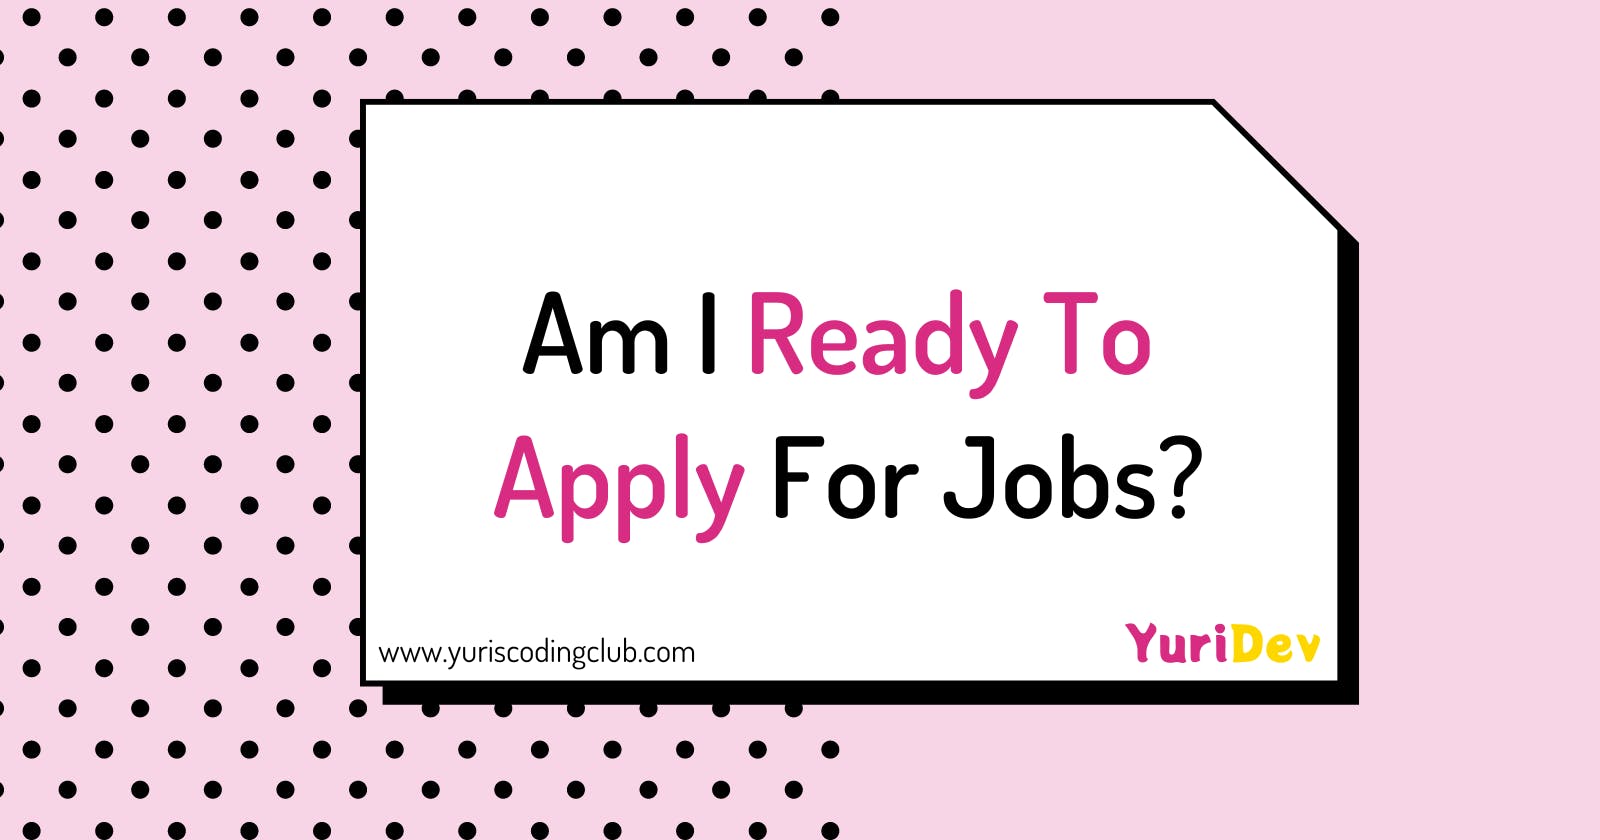 Am I Ready To Apply For Jobs?